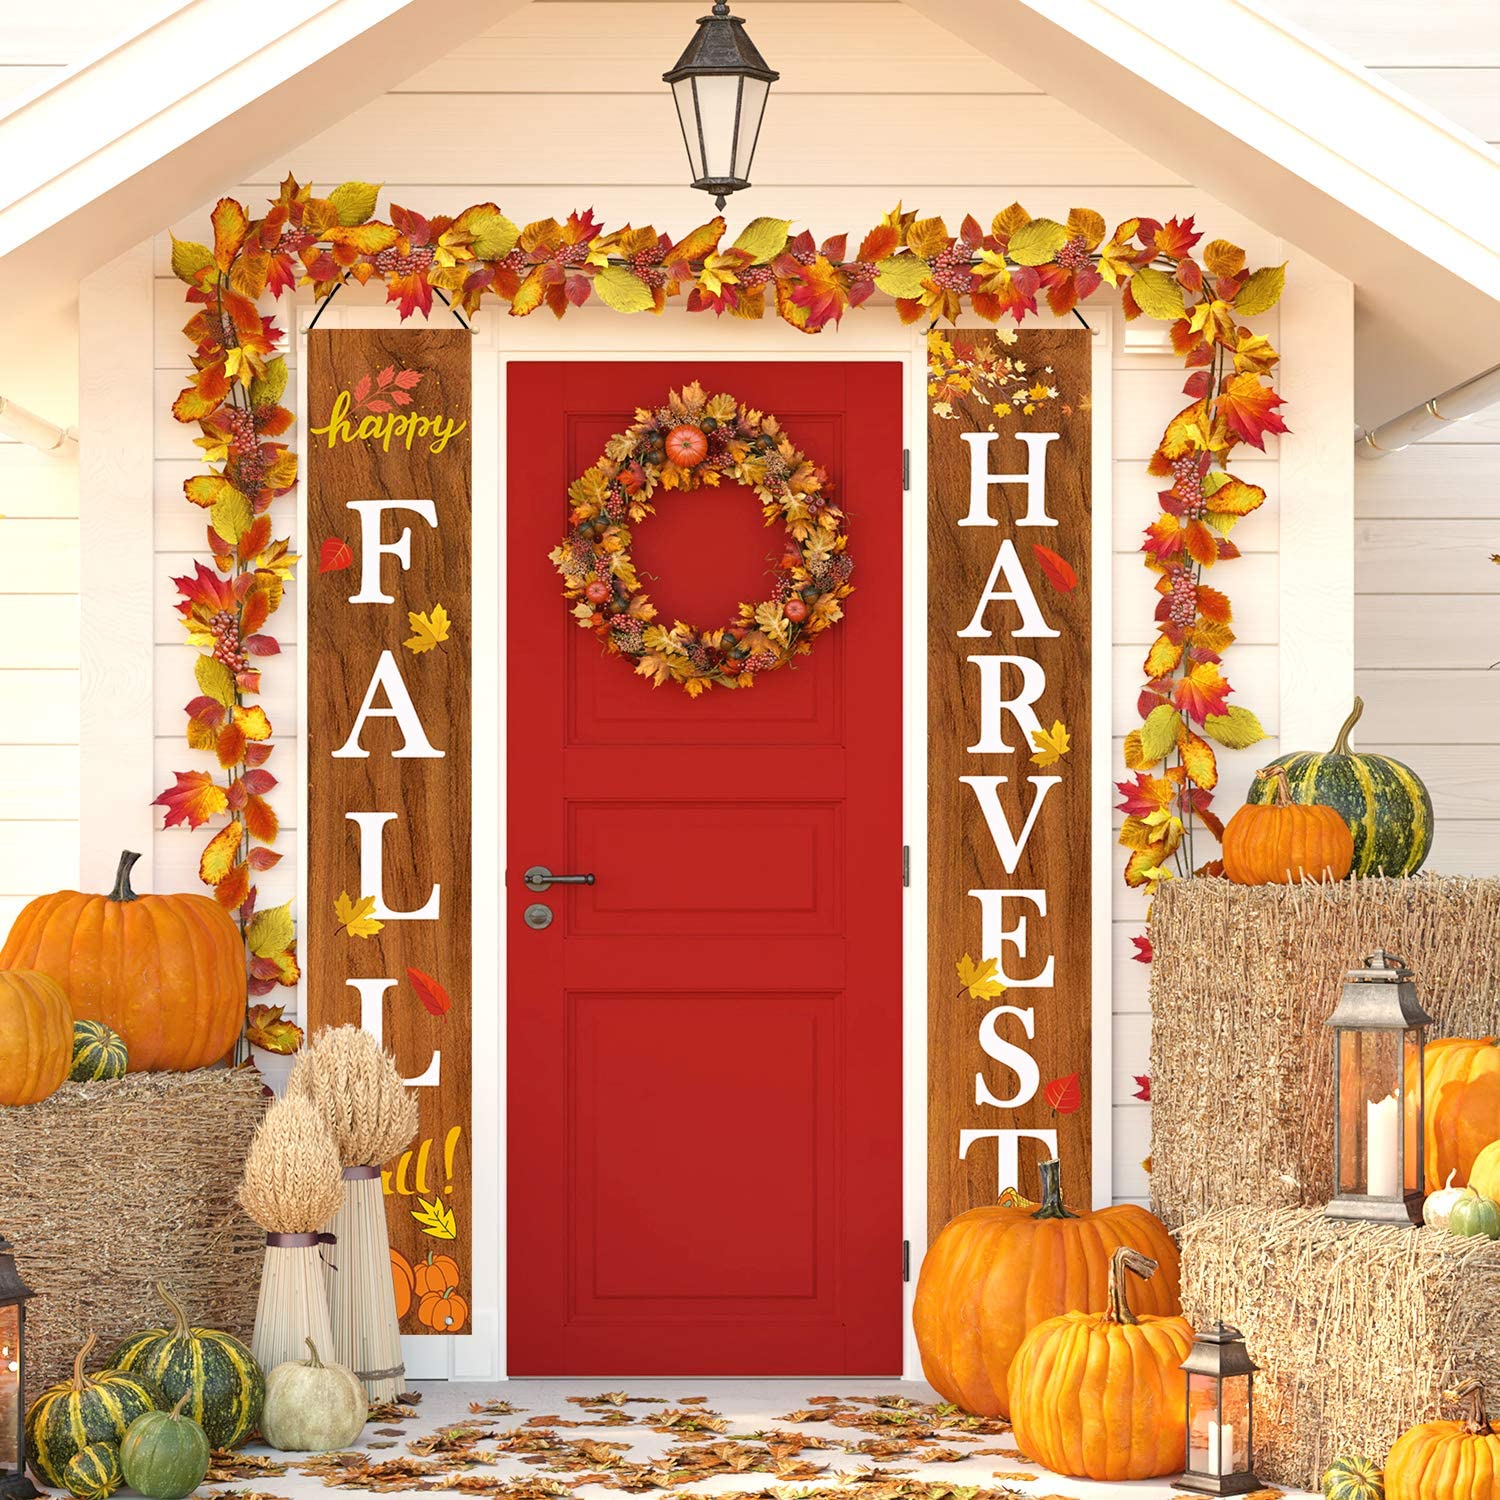 Happy Fall Harvest banners